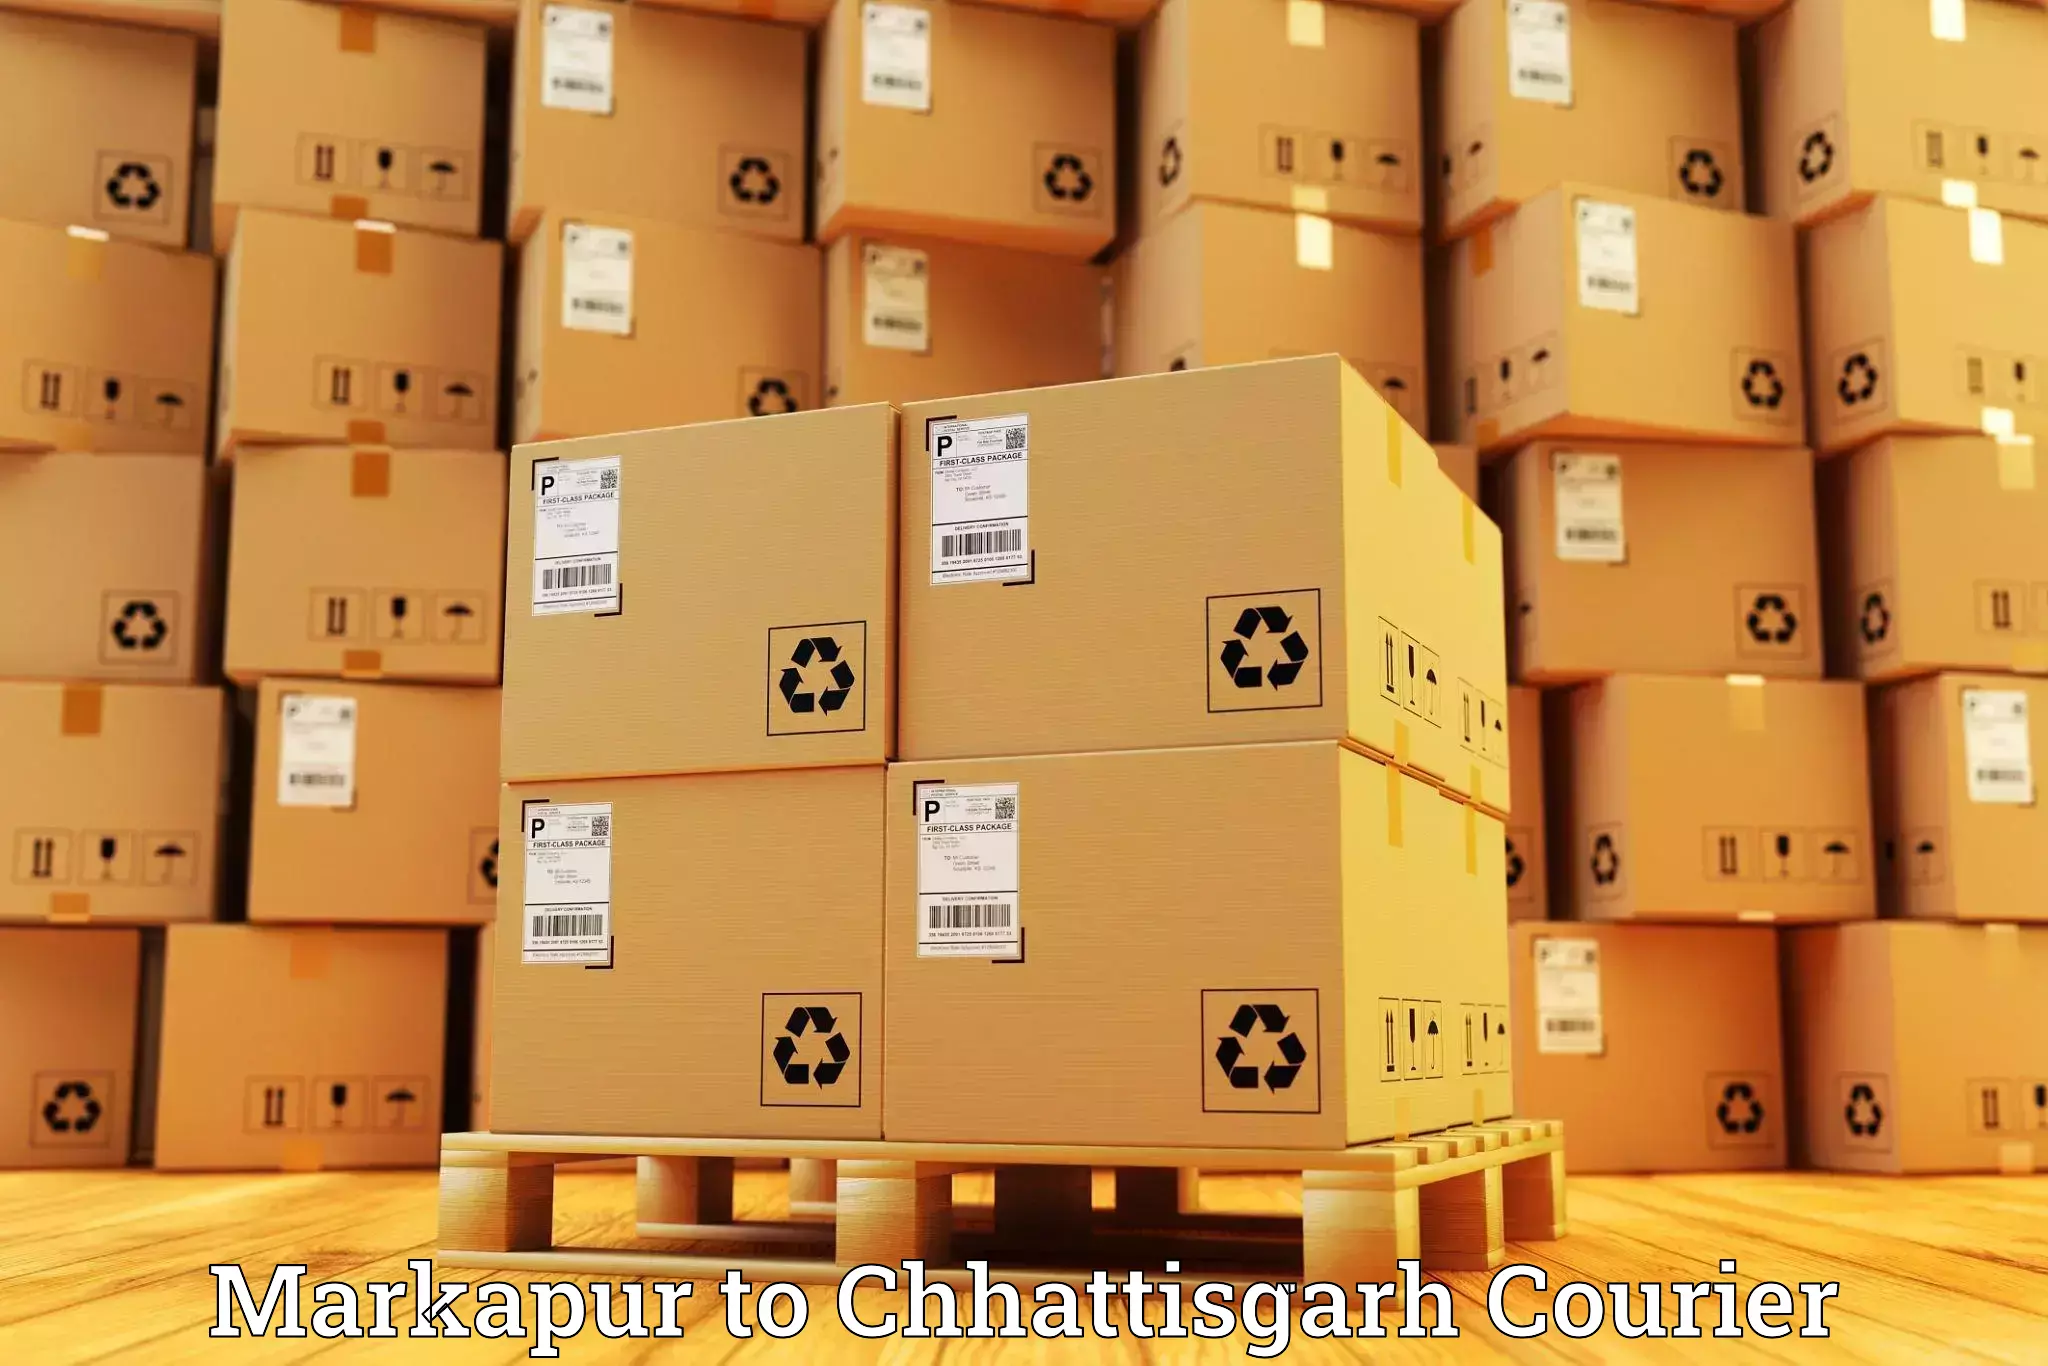 Courier service comparison in Markapur to Sirpur